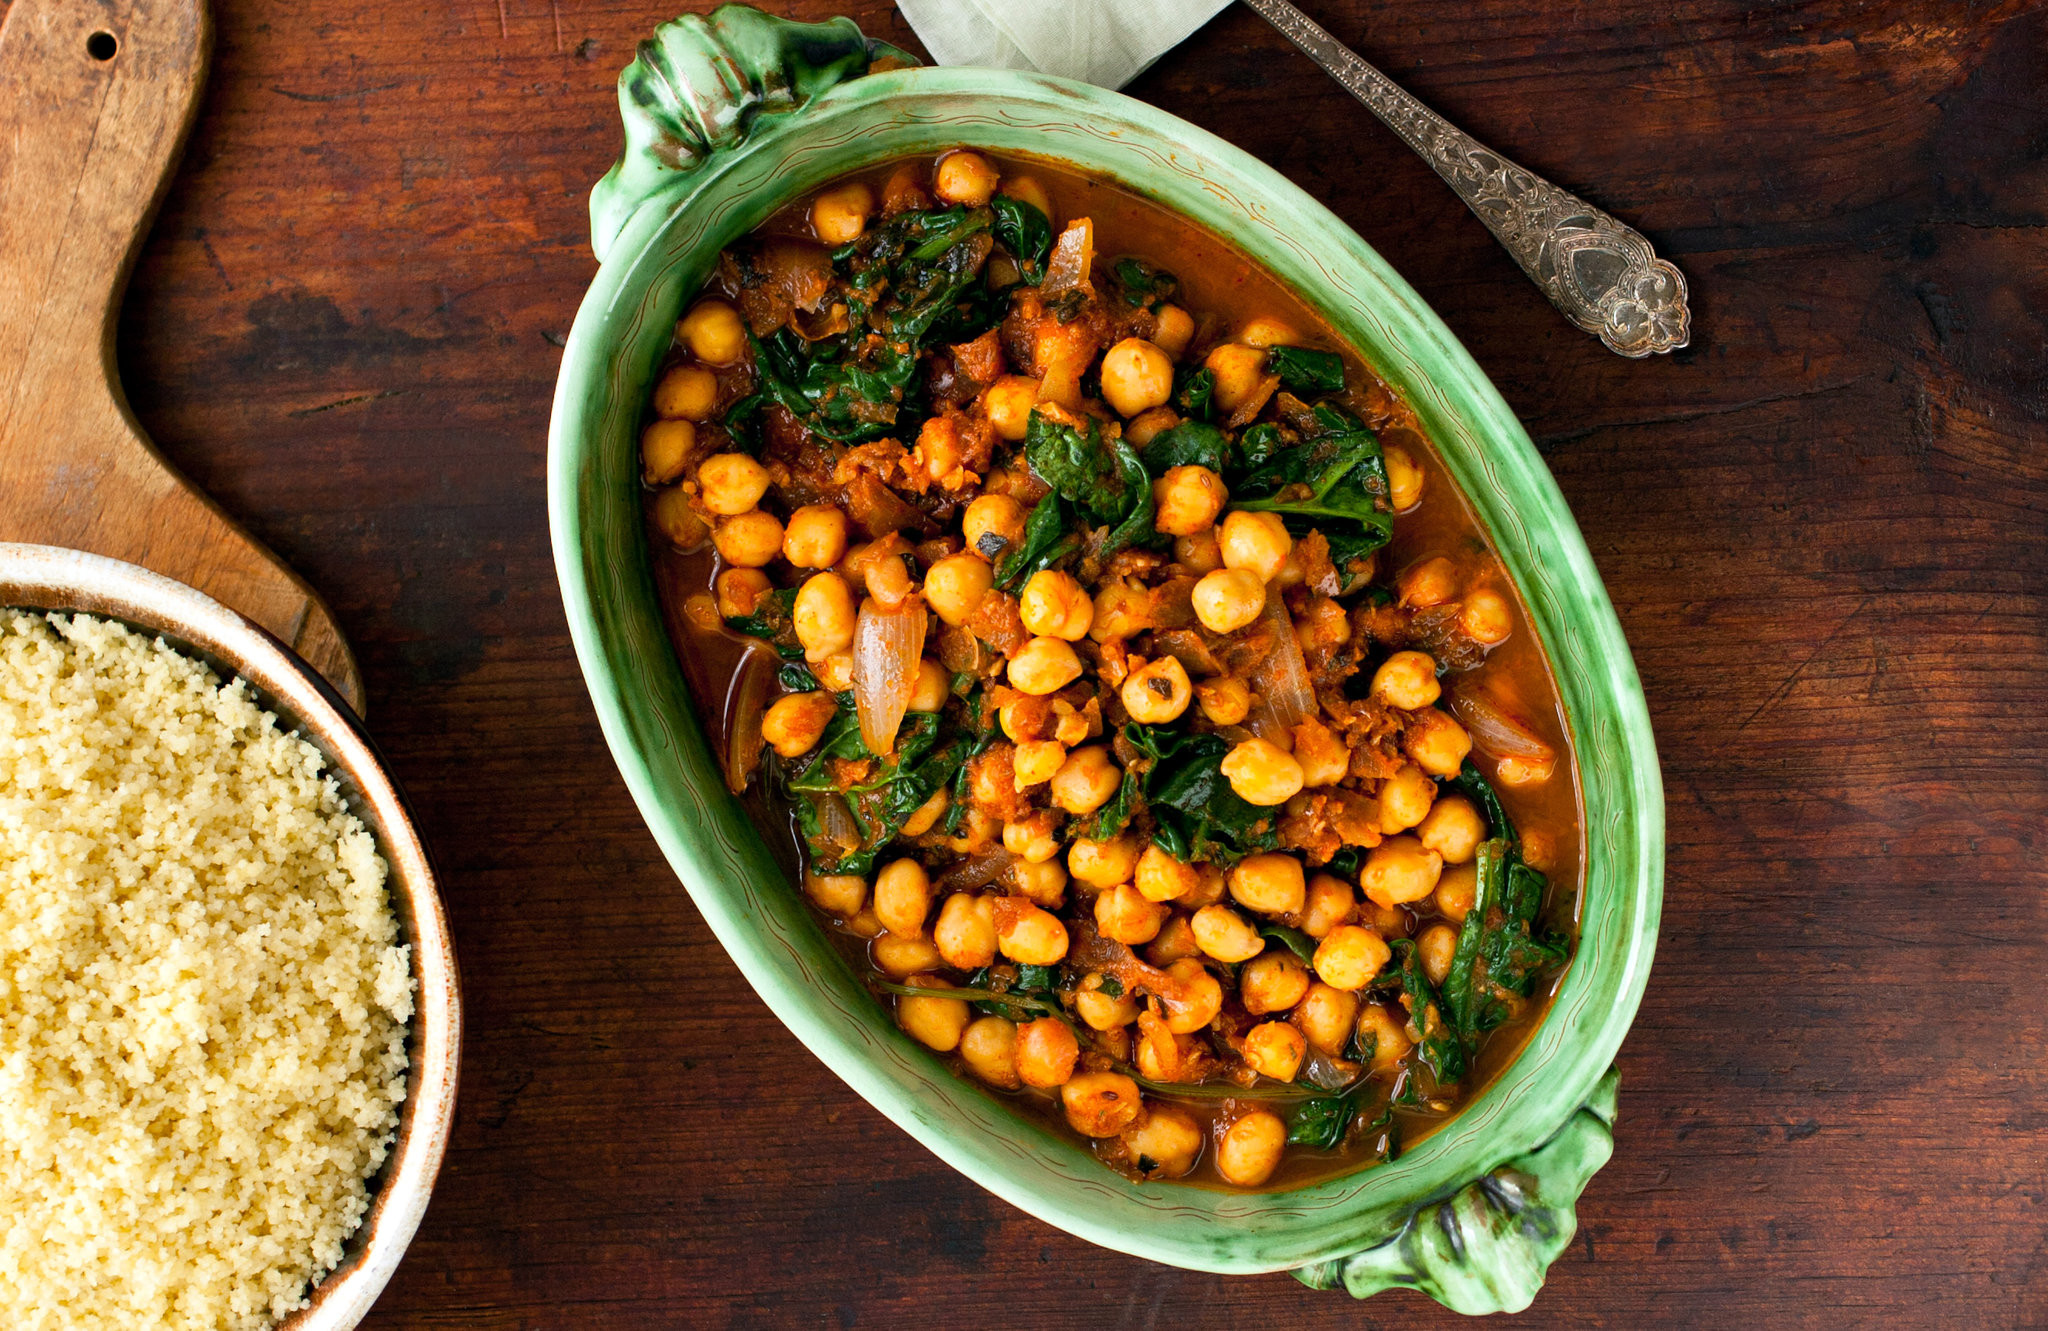 Chickpeas Recipes For Baby
 Couscous With Chickpeas Spinach and Mint Recipe NYT Cooking